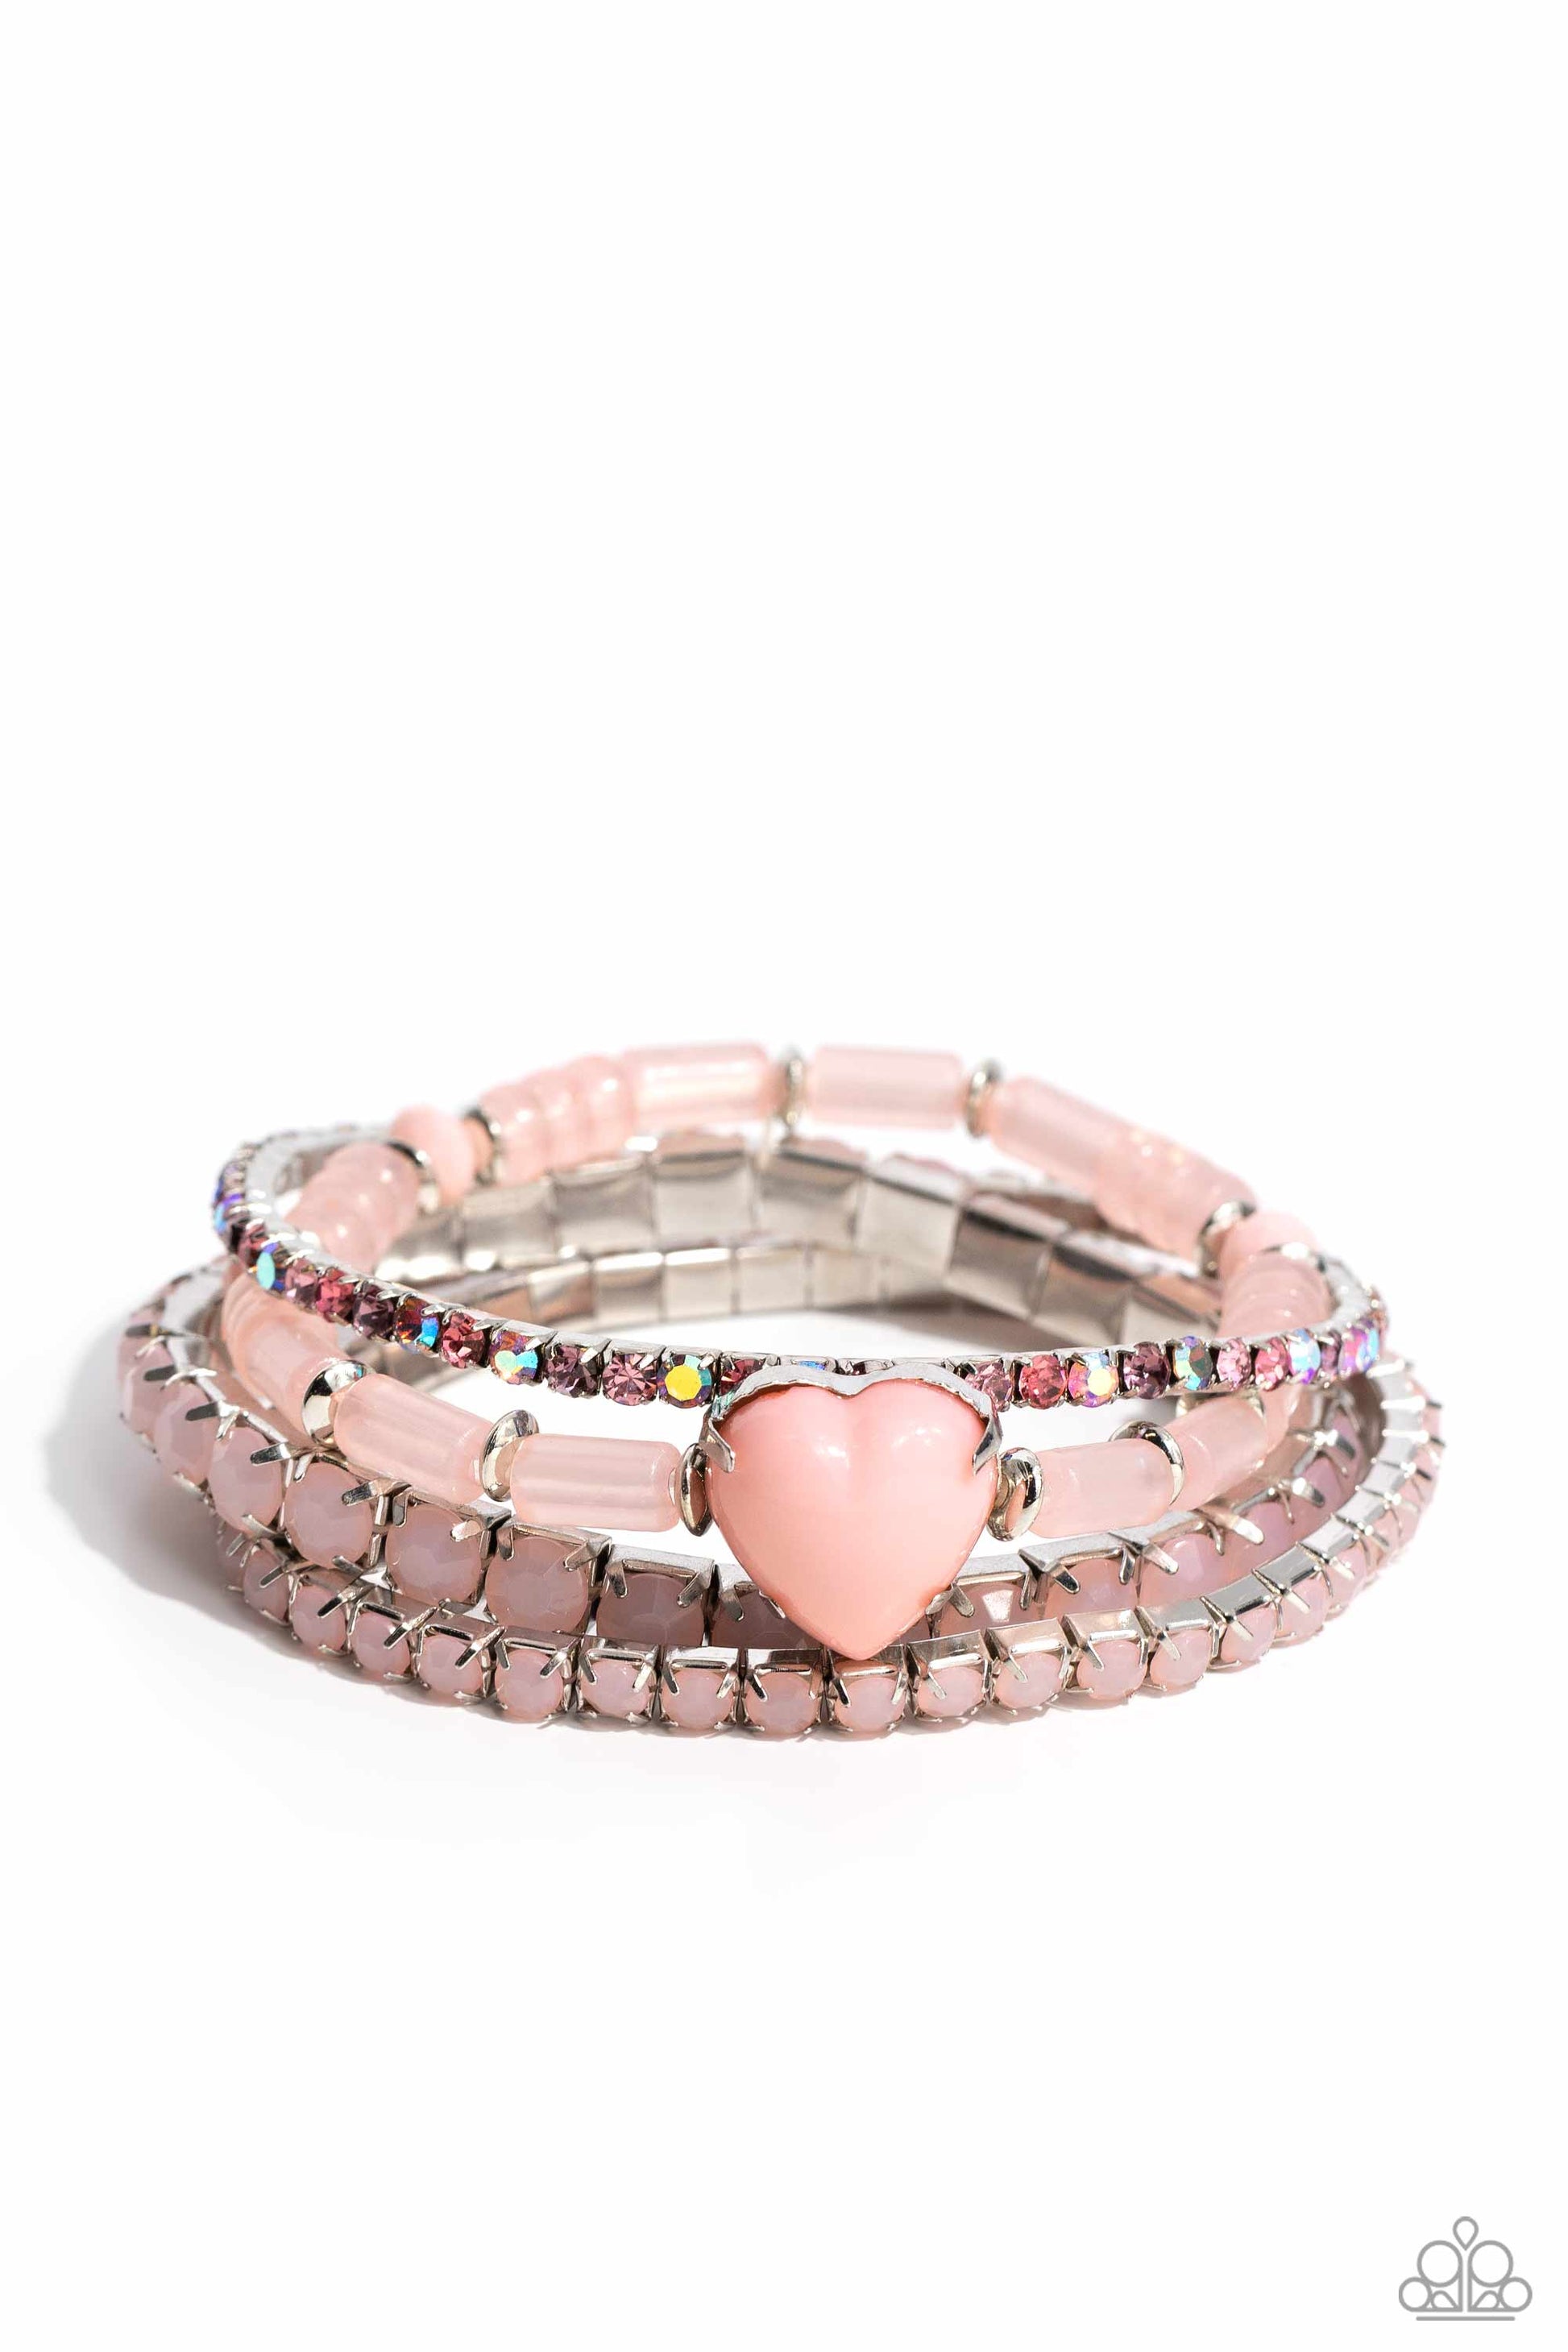 "True Loves Theme - Pink Heart Bracelets - Paparazzi Accessories - Pronged in silver fittings, a Crystal Rose heart bracelet is infused along a milky Crystal Rose-beaded bracelet. Multicolored pink rhinestones and Crystal Rose beads are set in square box fittings creating a dramatic collision of color and shimmer."